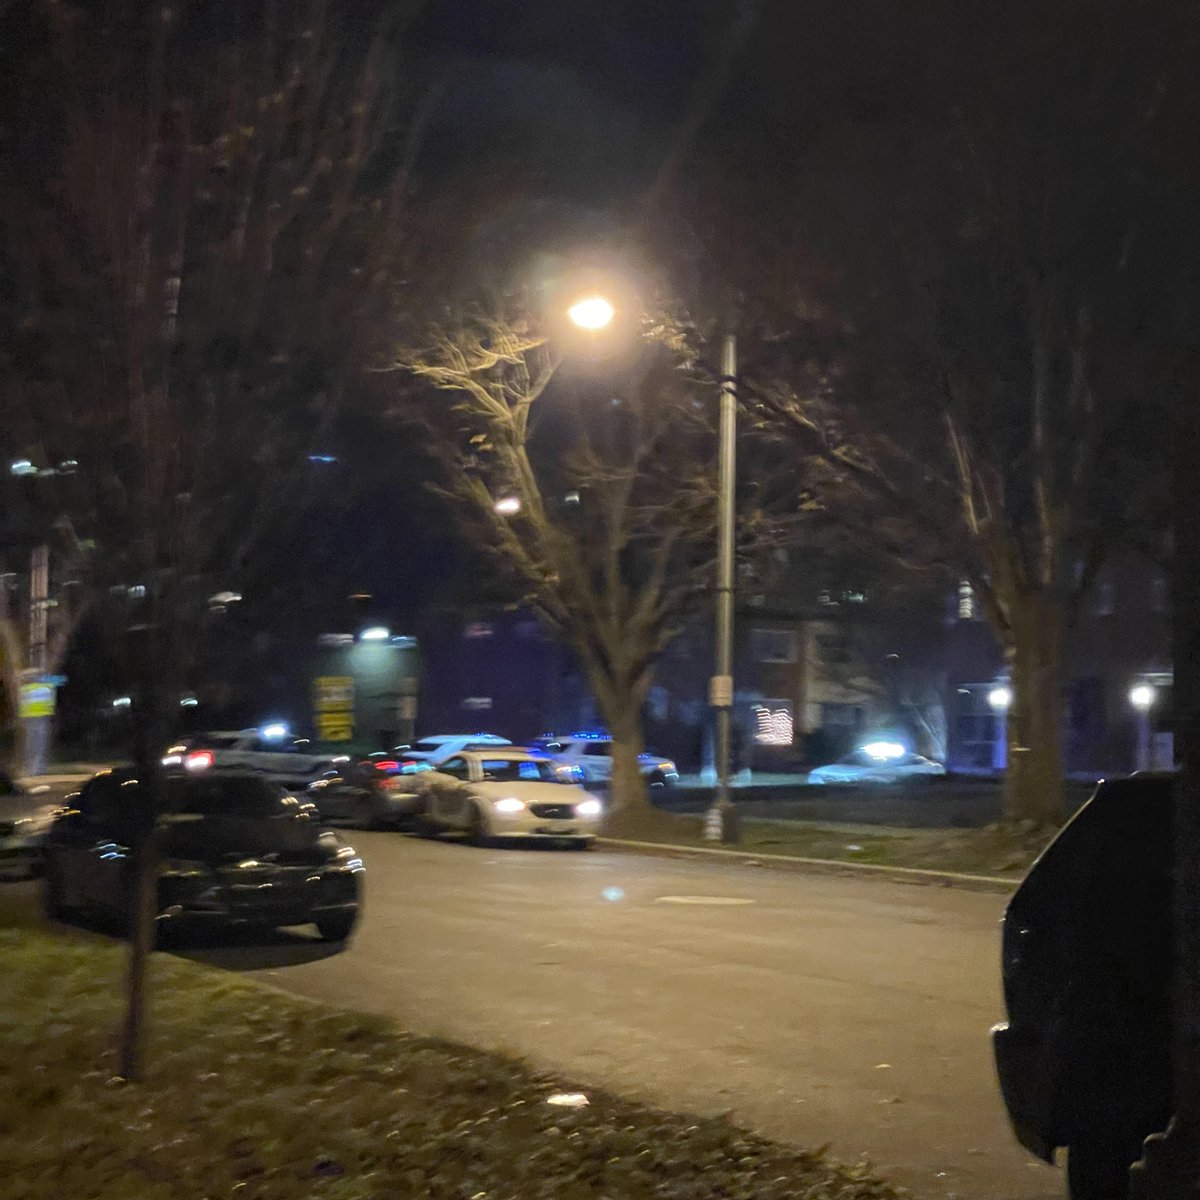 ANOTHER SHOTS-FIRED INCIDENT-- Greenleaf Gardens area, 3rd St/K St/Delaware Ave SW DC. About an hour ago gunfire was reported; so far police found about 10 casings but nobody injured